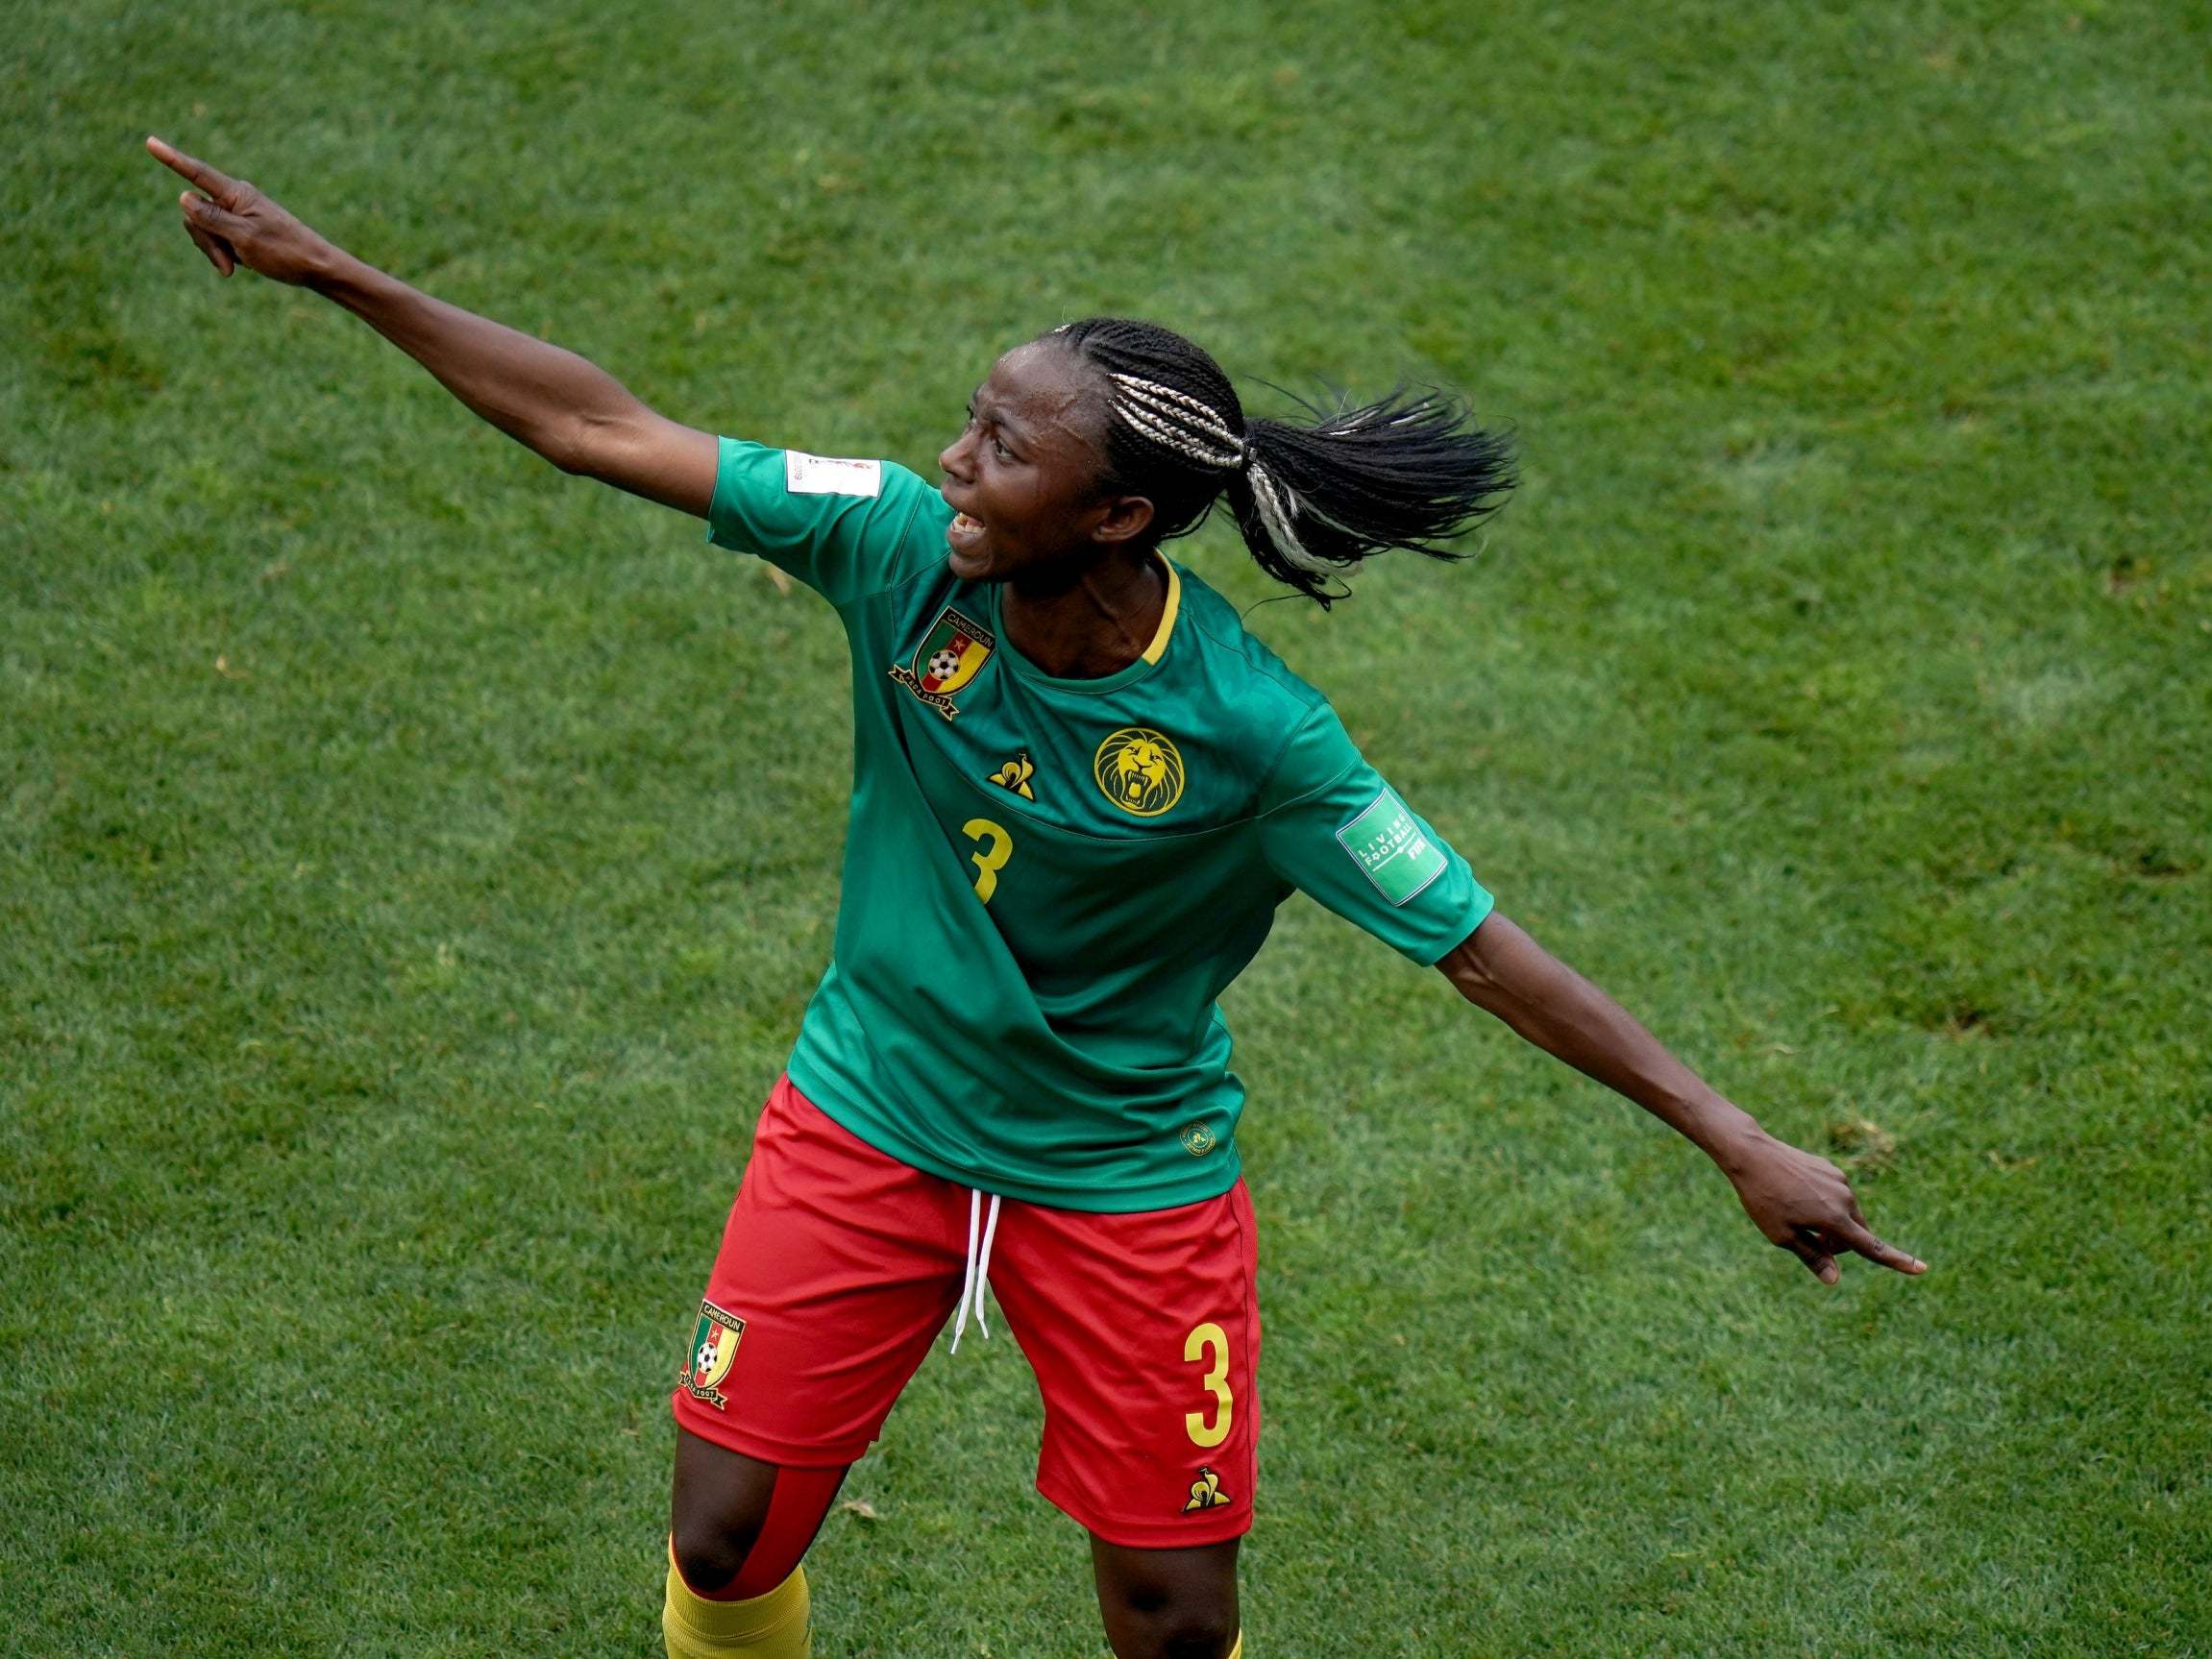 Cameroon's Ajara Nchoutreacted furiously to having her goal ruled out